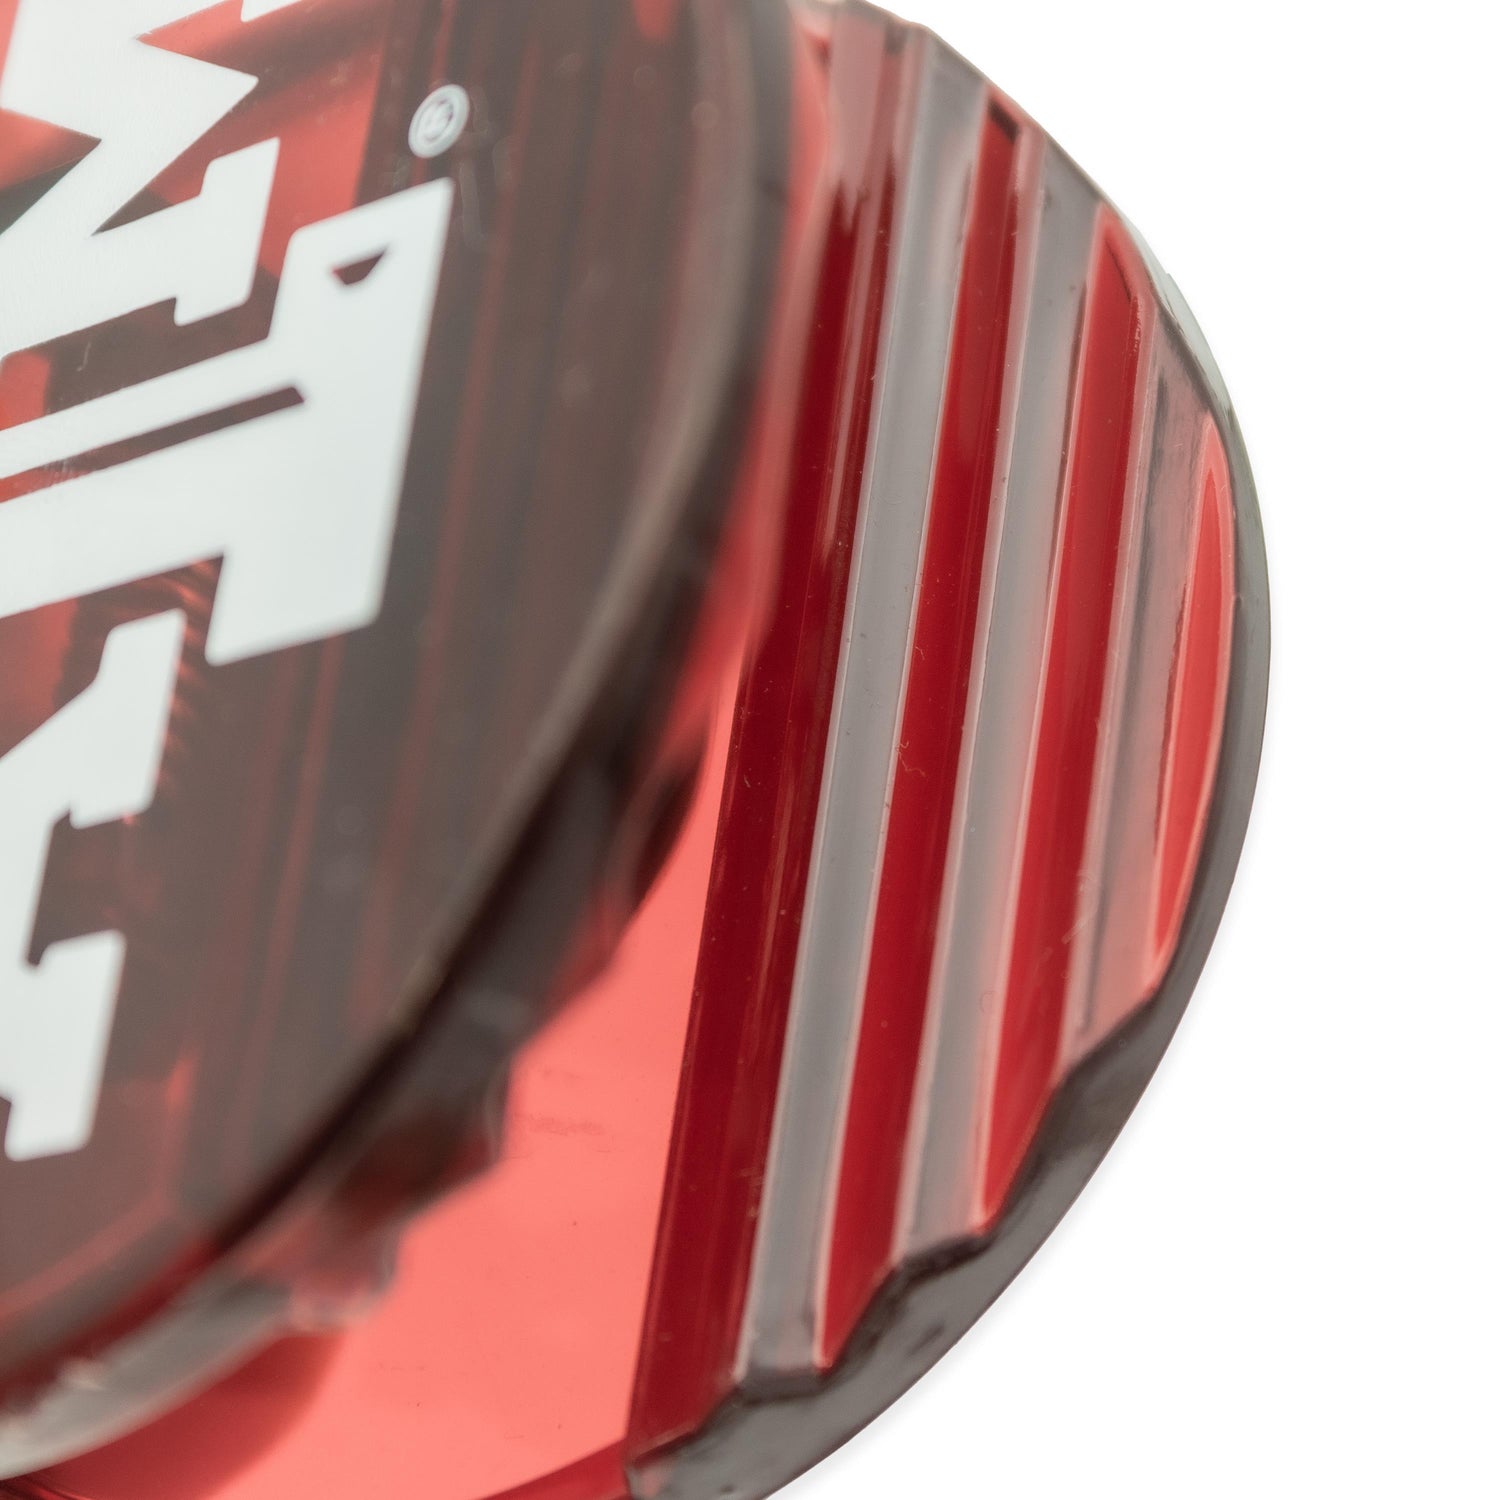 Texas A&M Magnetic Chip Clip